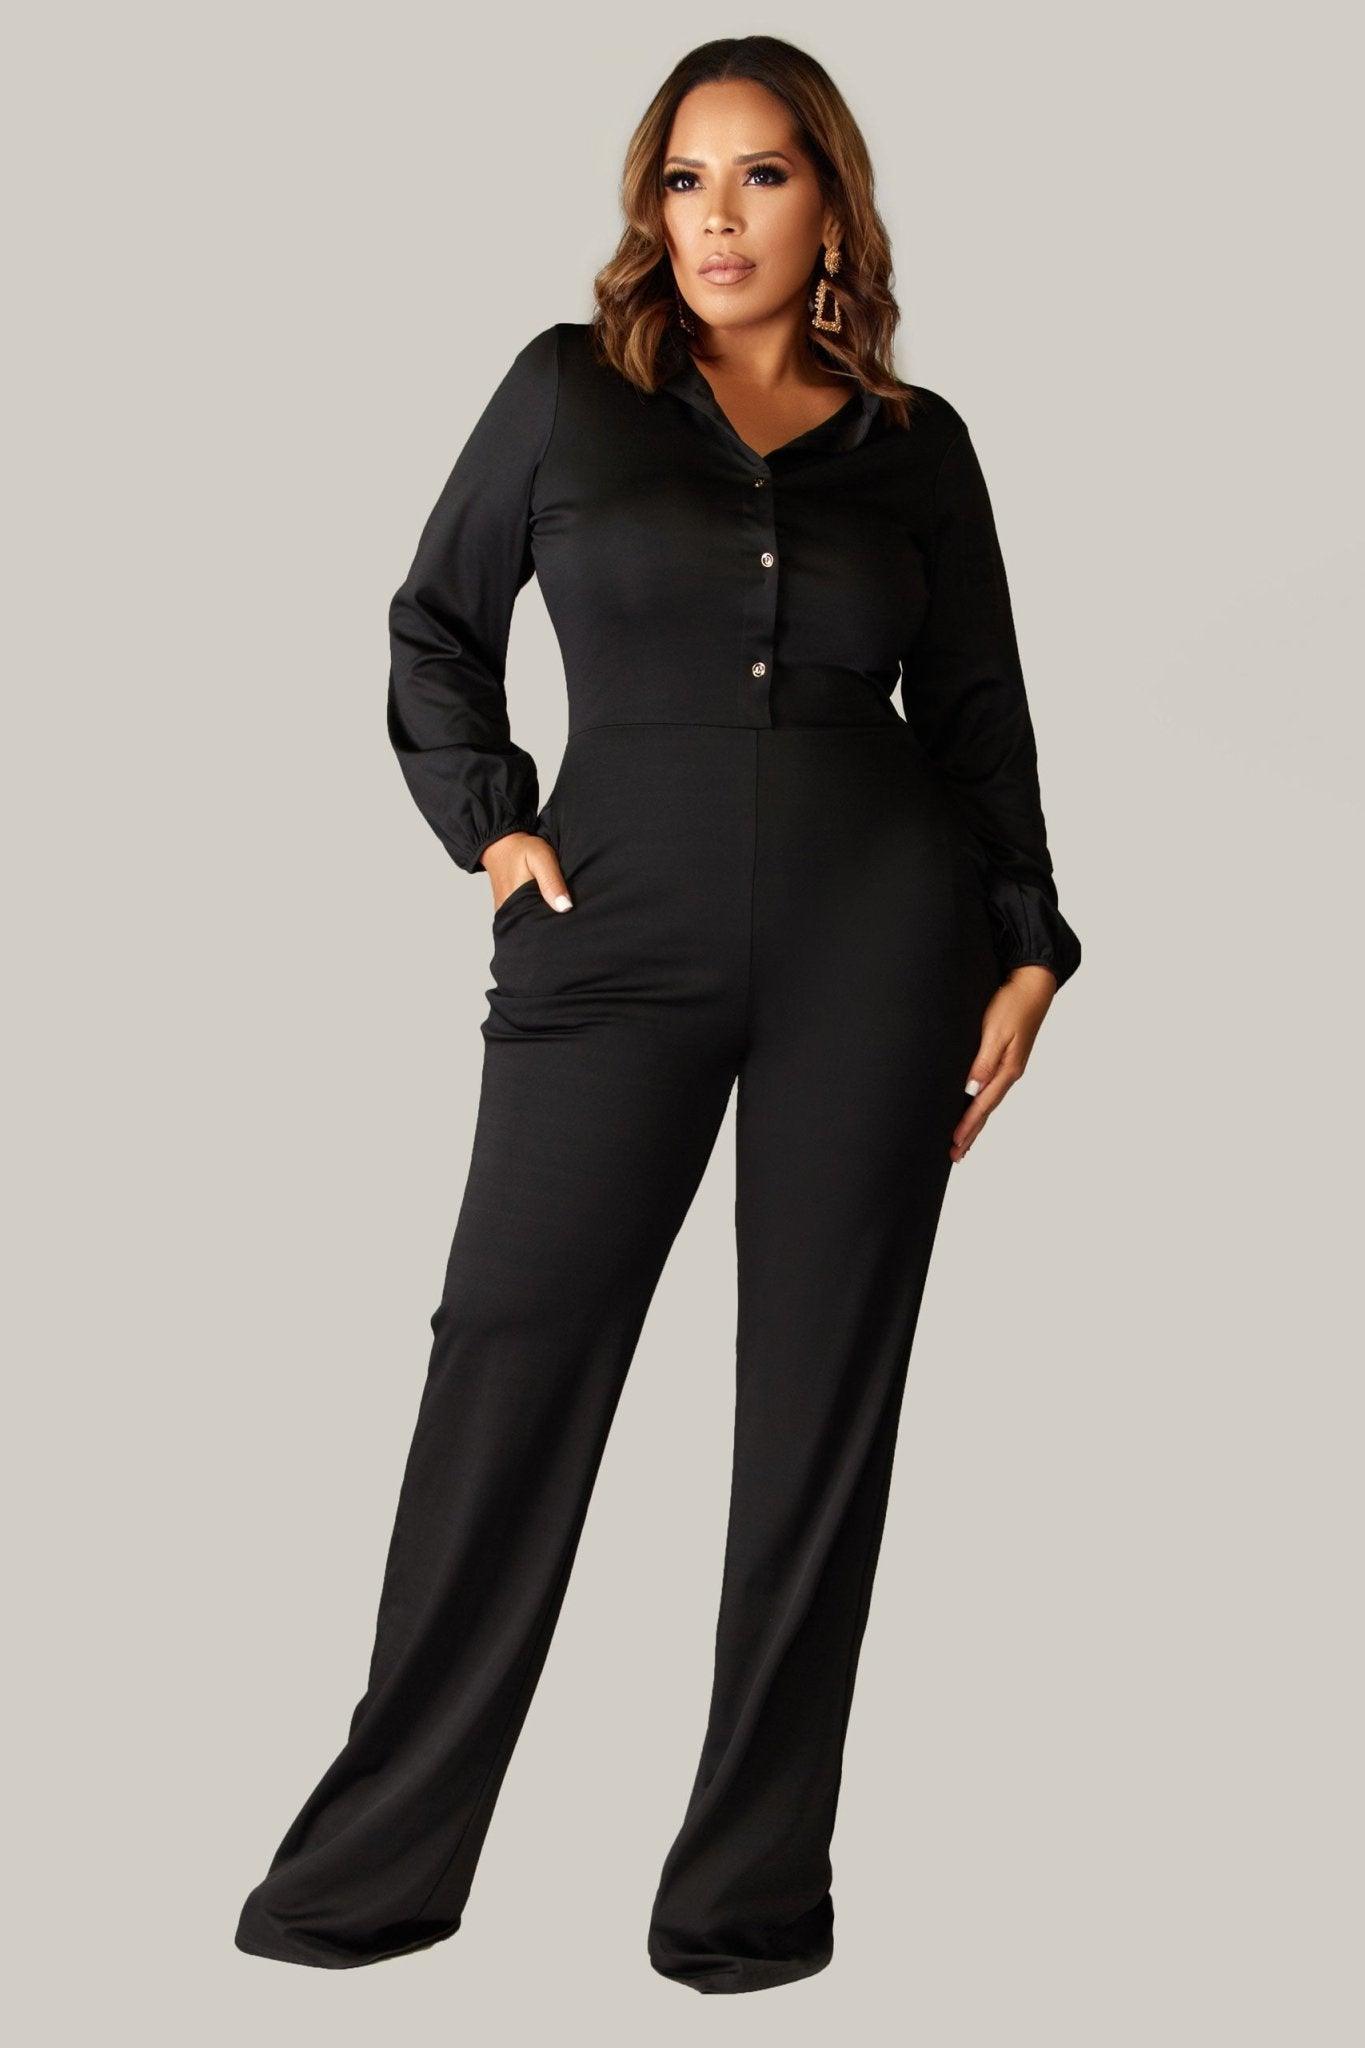 Arabella Button Up Jumpsuit - MY SEXY STYLES